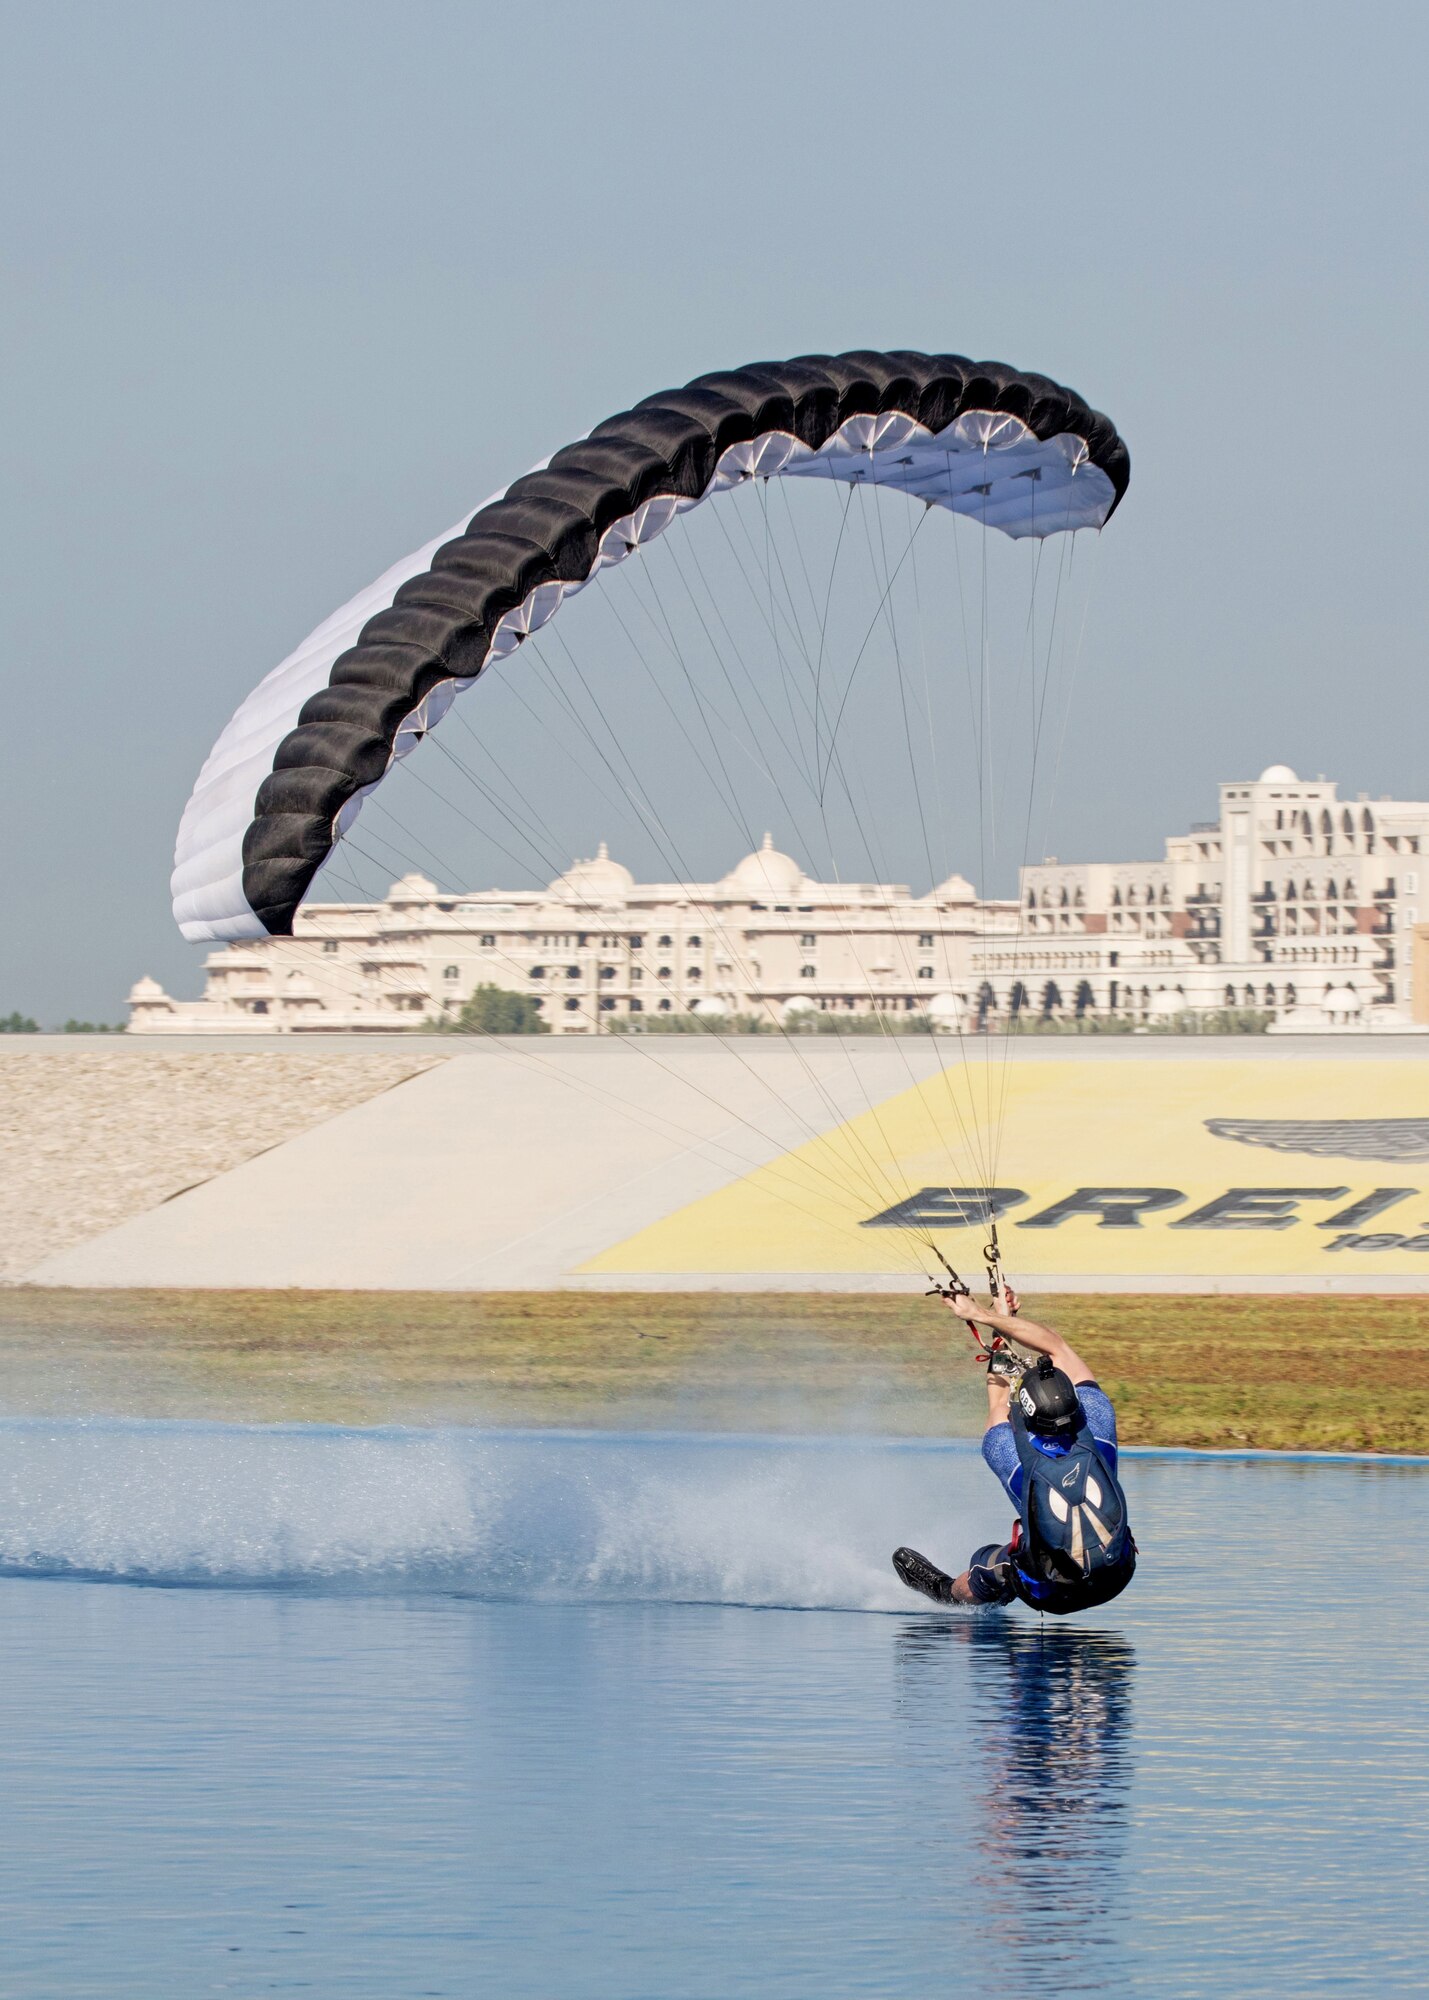 Maj. Matthew Shull, 6th Space Operations Squadron, performs a move called "blindman" at a freestyle event following the 9th World Cup of Canopy Piloting competition in Dubai, United Arab Emirates, Dec. 1, 2017.